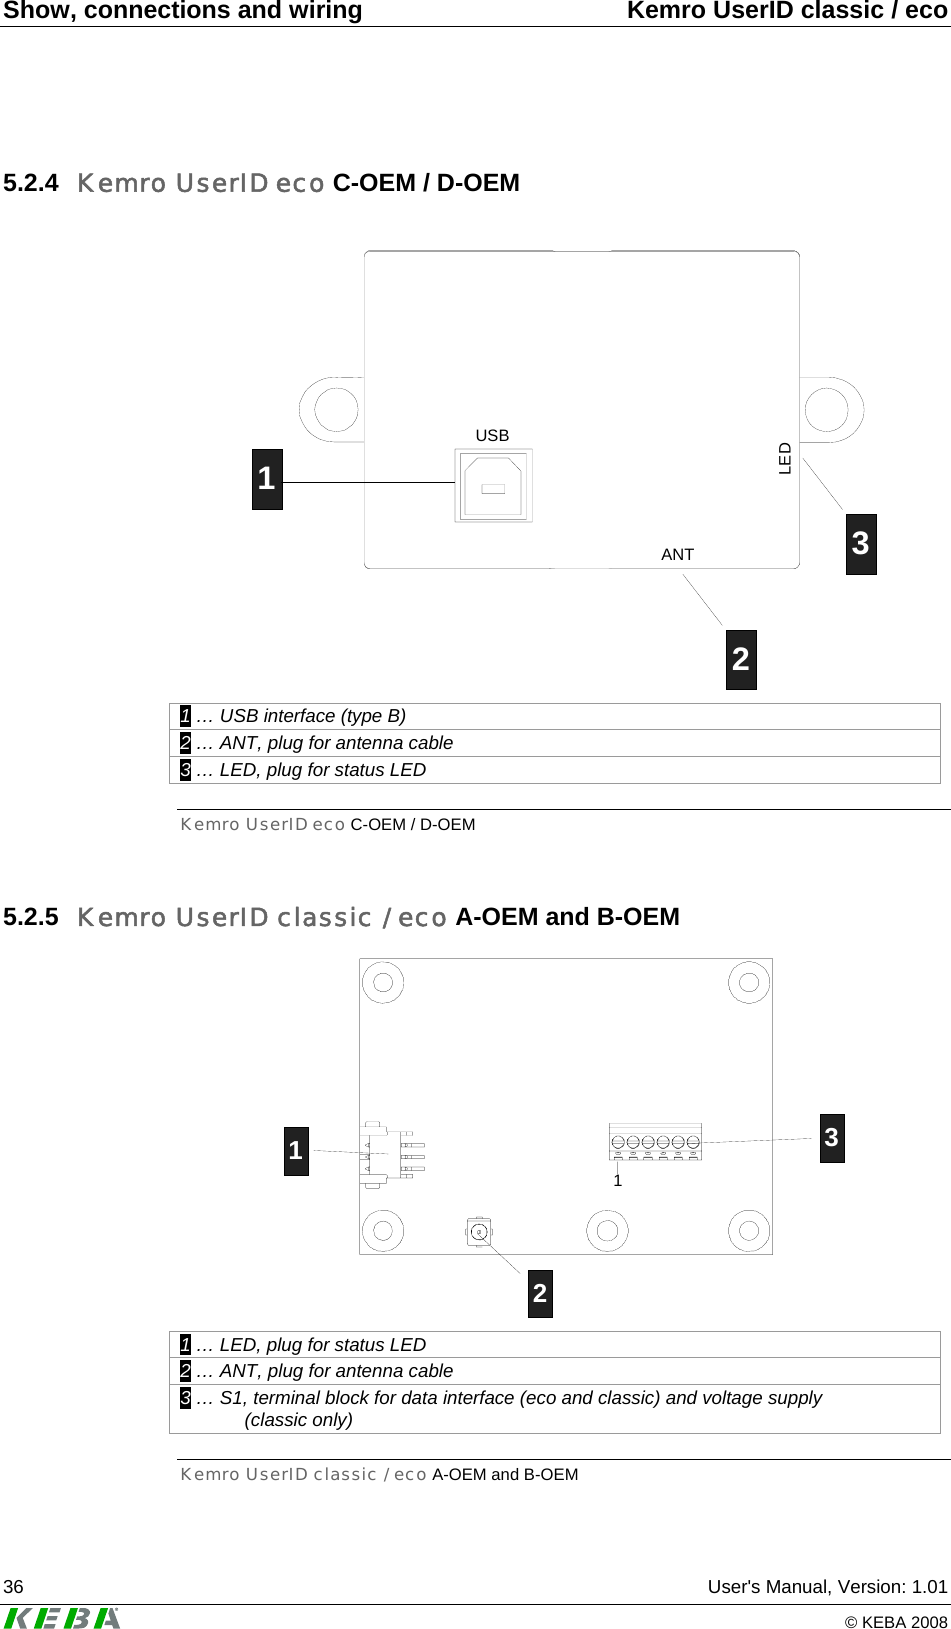 Show, connections and wiring  Kemro UserID classic / eco 36  User&apos;s Manual, Version: 1.01   © KEBA 2008 5.2.4  Kemro UserID eco C-OEM / D-OEM  USBANTLED123 1 … USB interface (type B) 2 … ANT, plug for antenna cable 3 … LED, plug for status LED Kemro UserID eco C-OEM / D-OEM 5.2.5  Kemro UserID classic / eco A-OEM and B-OEM 1132 1 … LED, plug for status LED 2 … ANT, plug for antenna cable 3 … S1, terminal block for data interface (eco and classic) and voltage supply   (classic only) Kemro UserID classic / eco A-OEM and B-OEM 